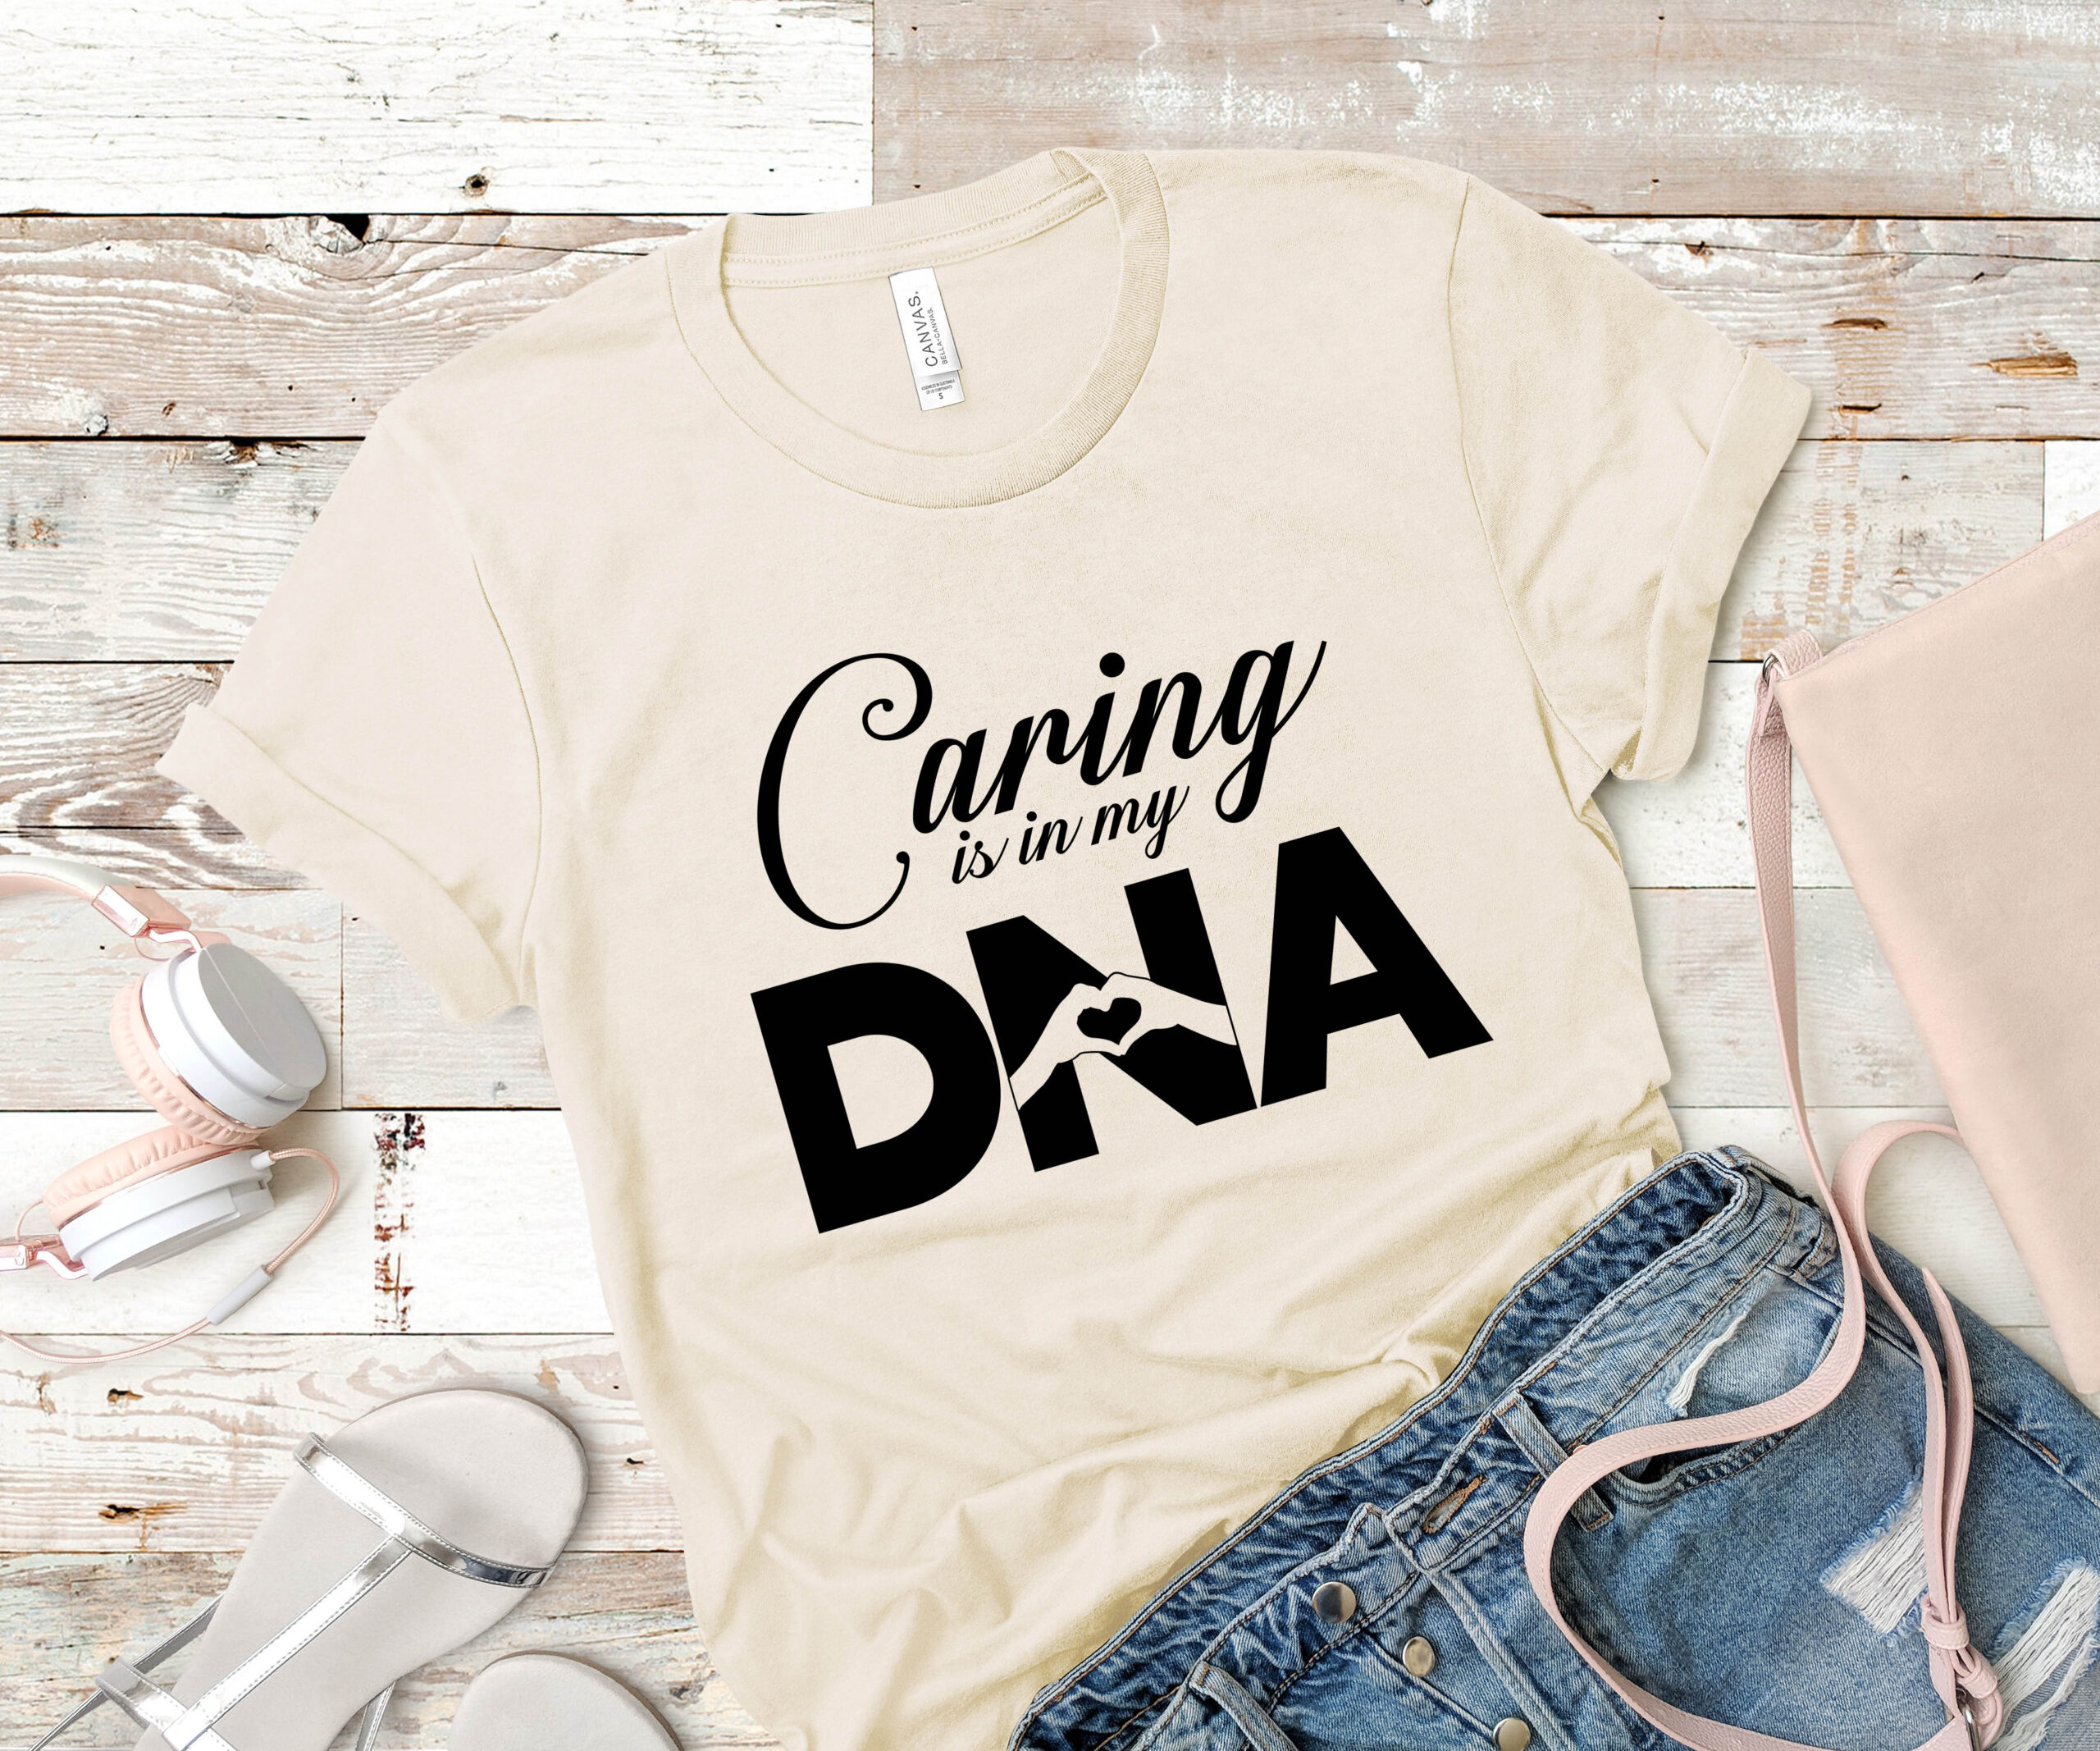 Free Caring is in my DNA SVG Cutting File for the Cricut.